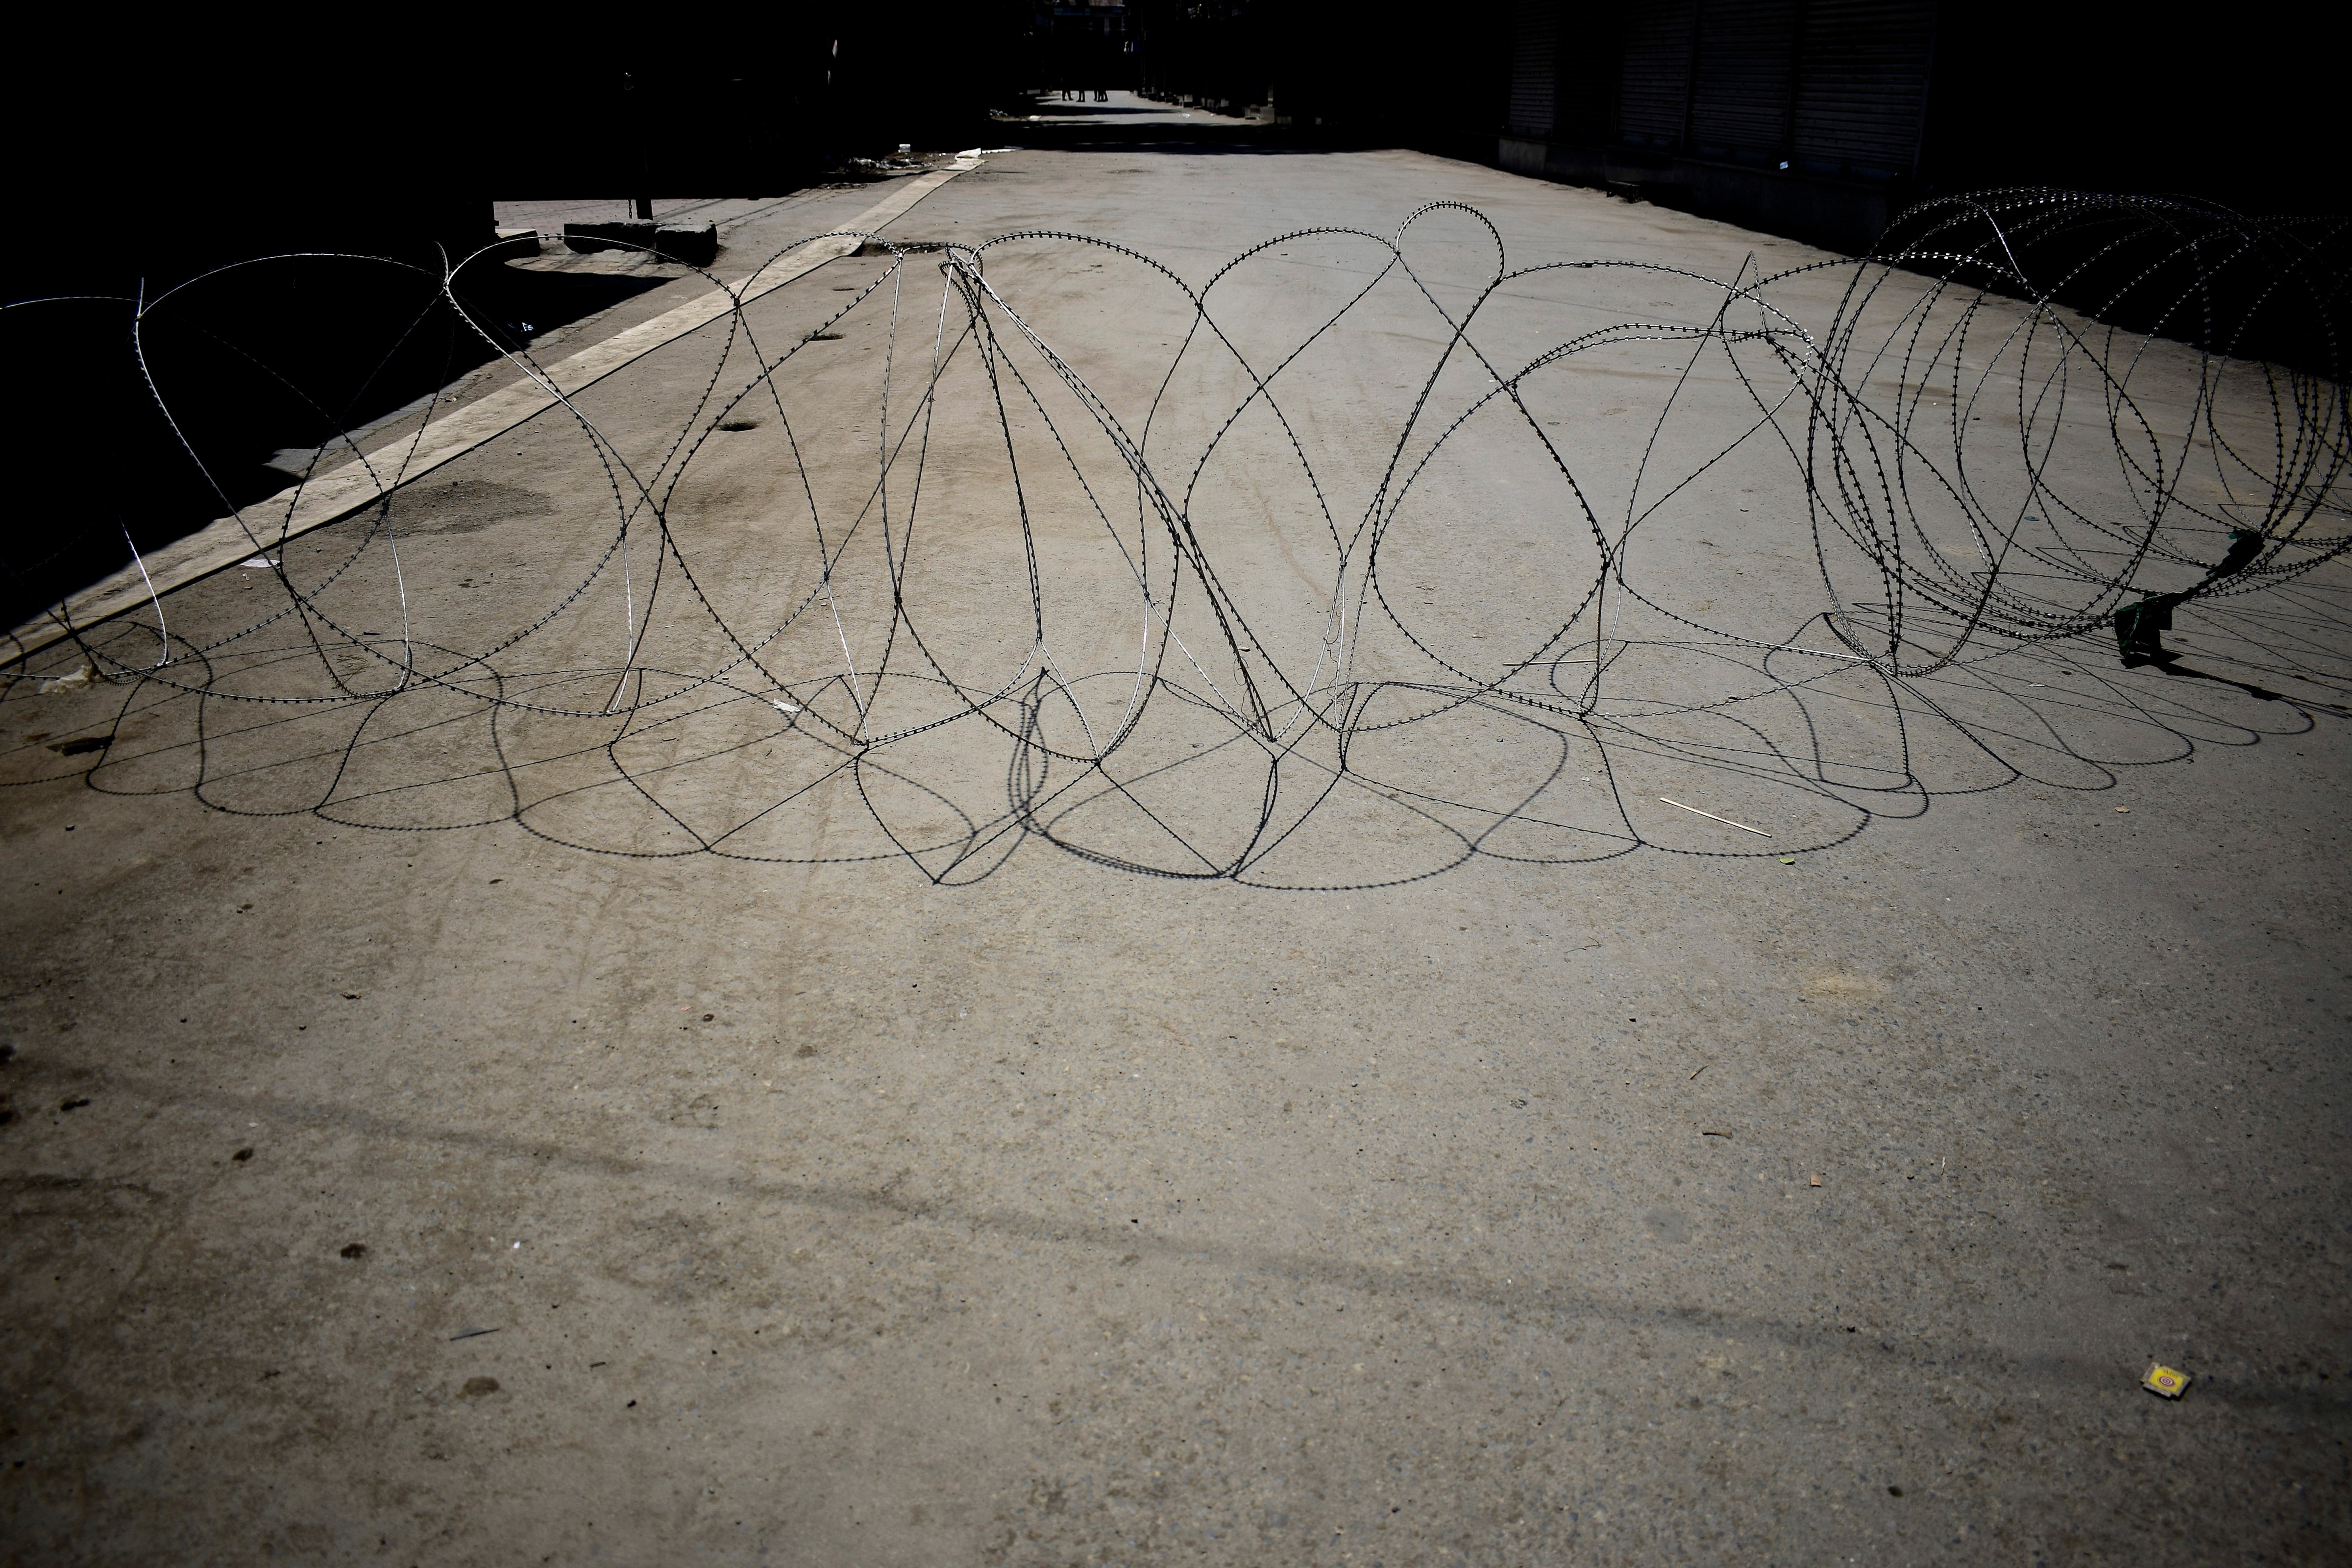 Barbed wire installed to seal roads, imposing curfew, in Srinagar, Kashmir on Aug. 6. (Sanna Irshad Mattoo for TIME)